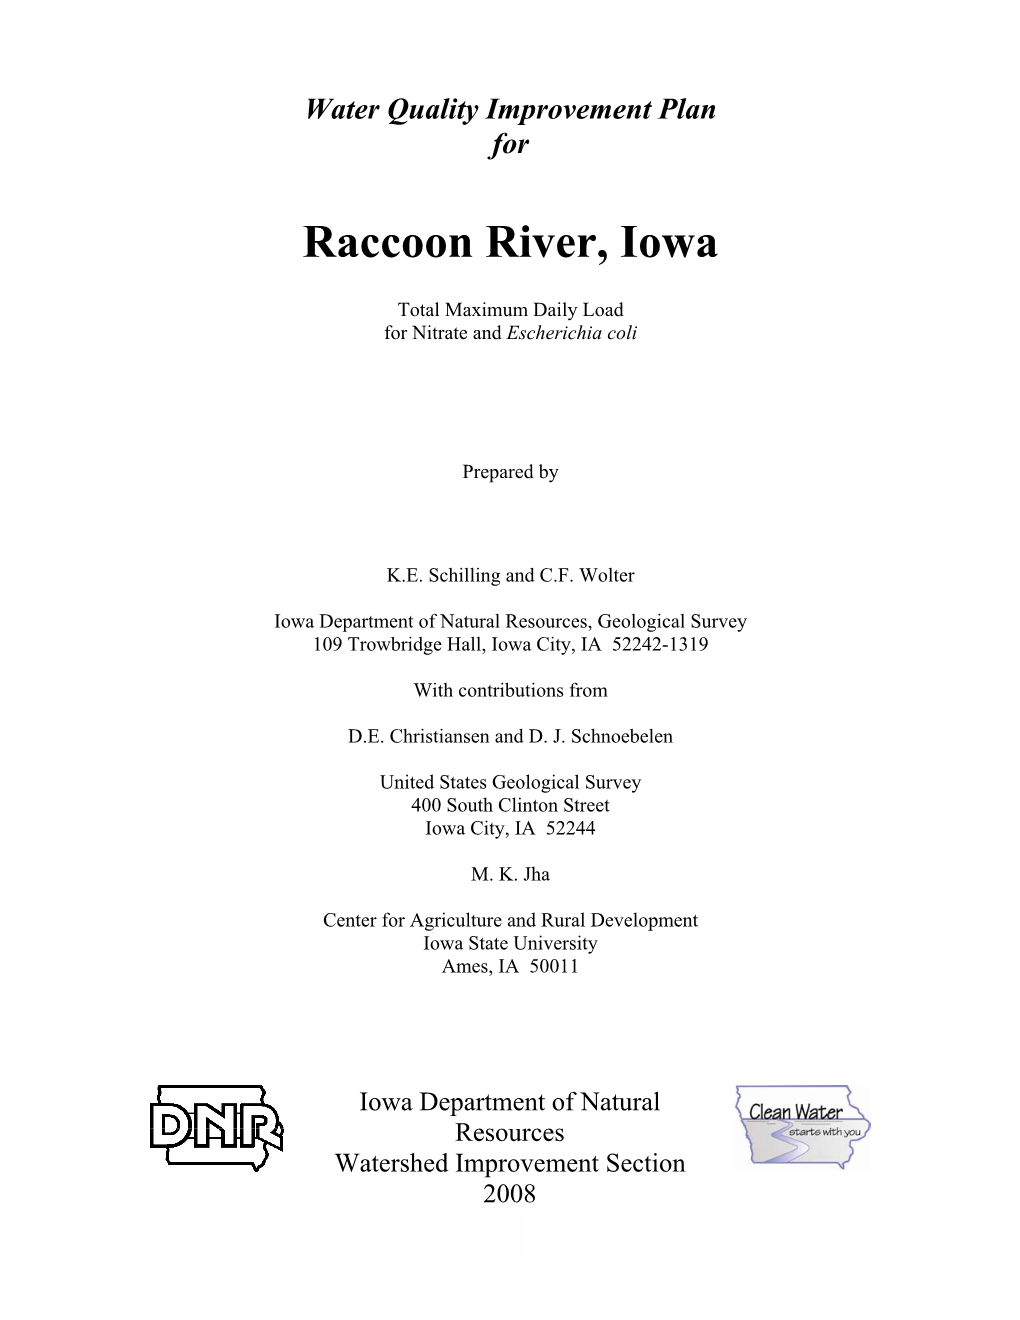 Raccoon River TMDL Is Four County-Wide “Snapshot” Sampling Events That Were Conducted in Polk County in Spring and Fall During 2004 and 2005 (Figure 3-9)